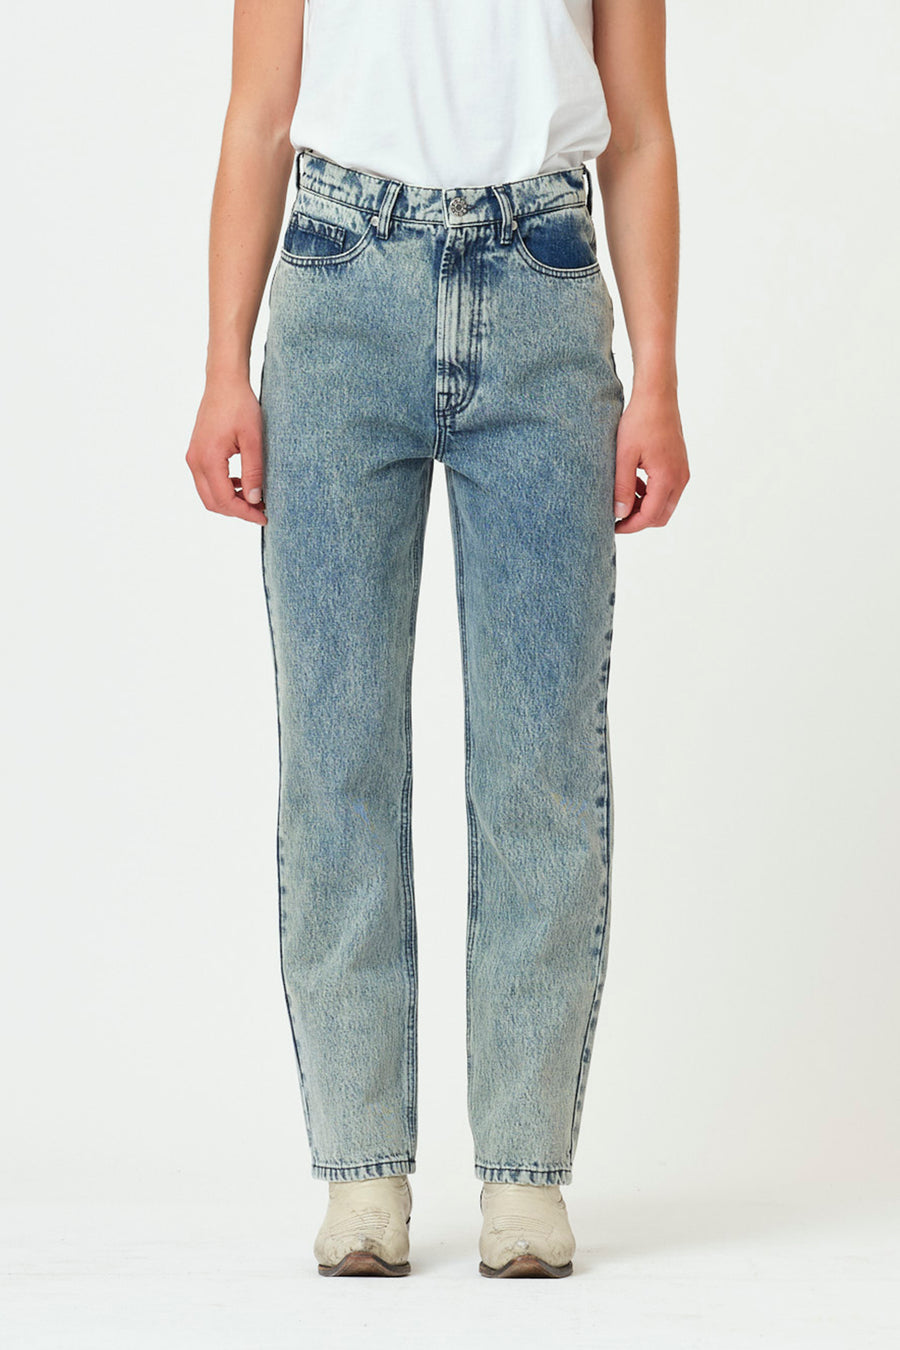 Share more than 156 bleached denim jeans best